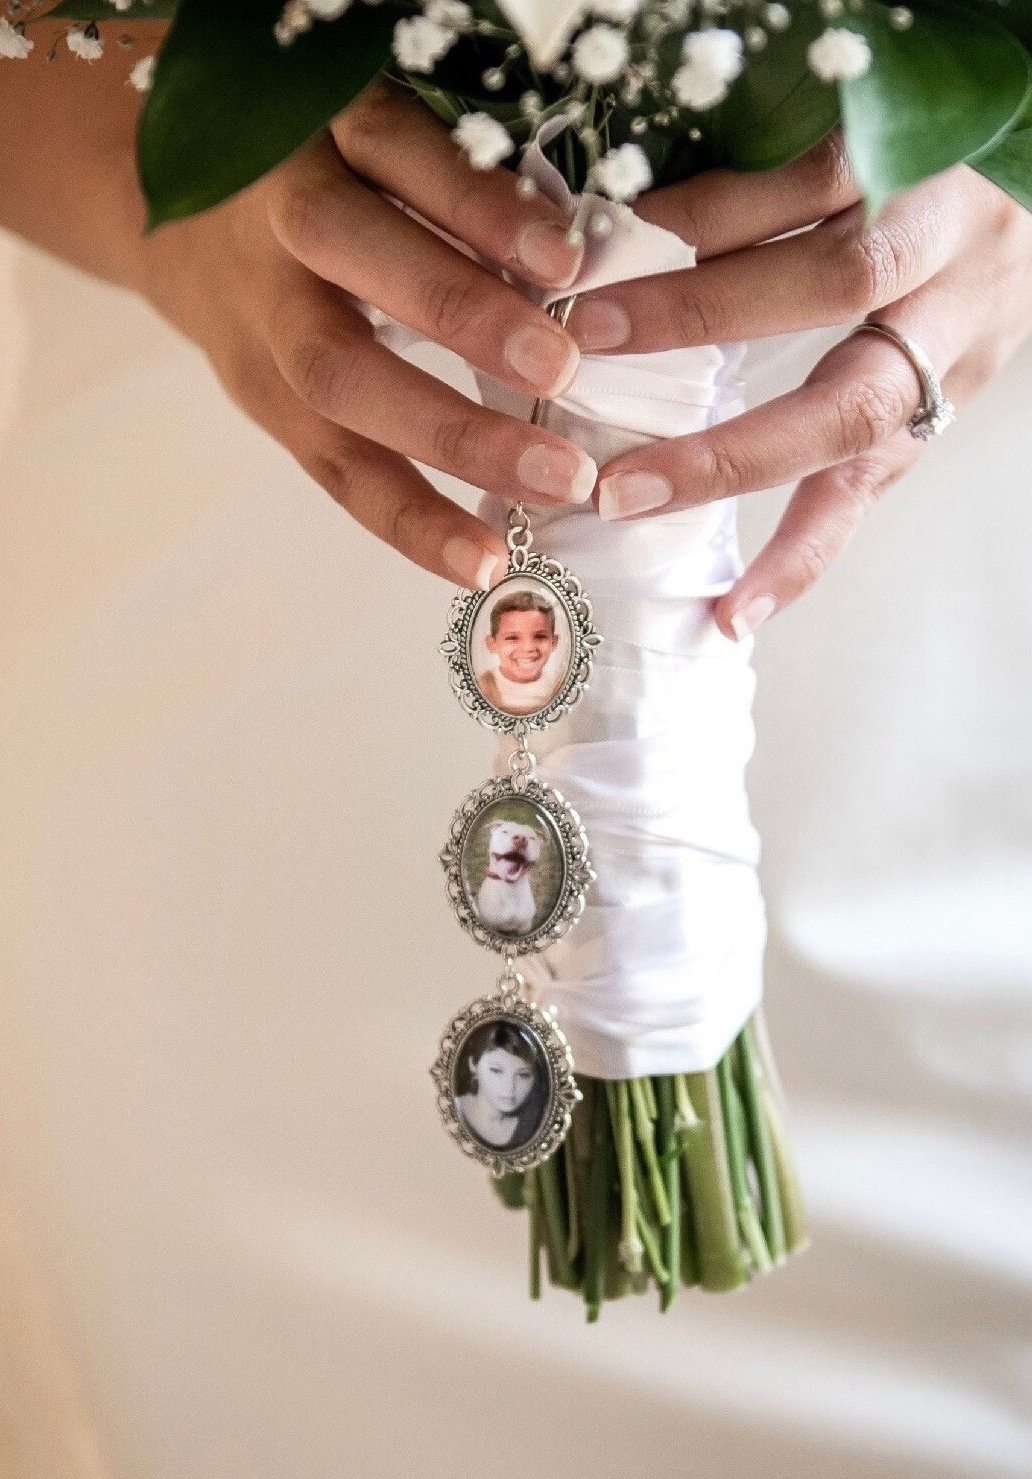 Bridal bouquet charms - set of two custom photo wedding bouquet charms –  Now That's Personal!